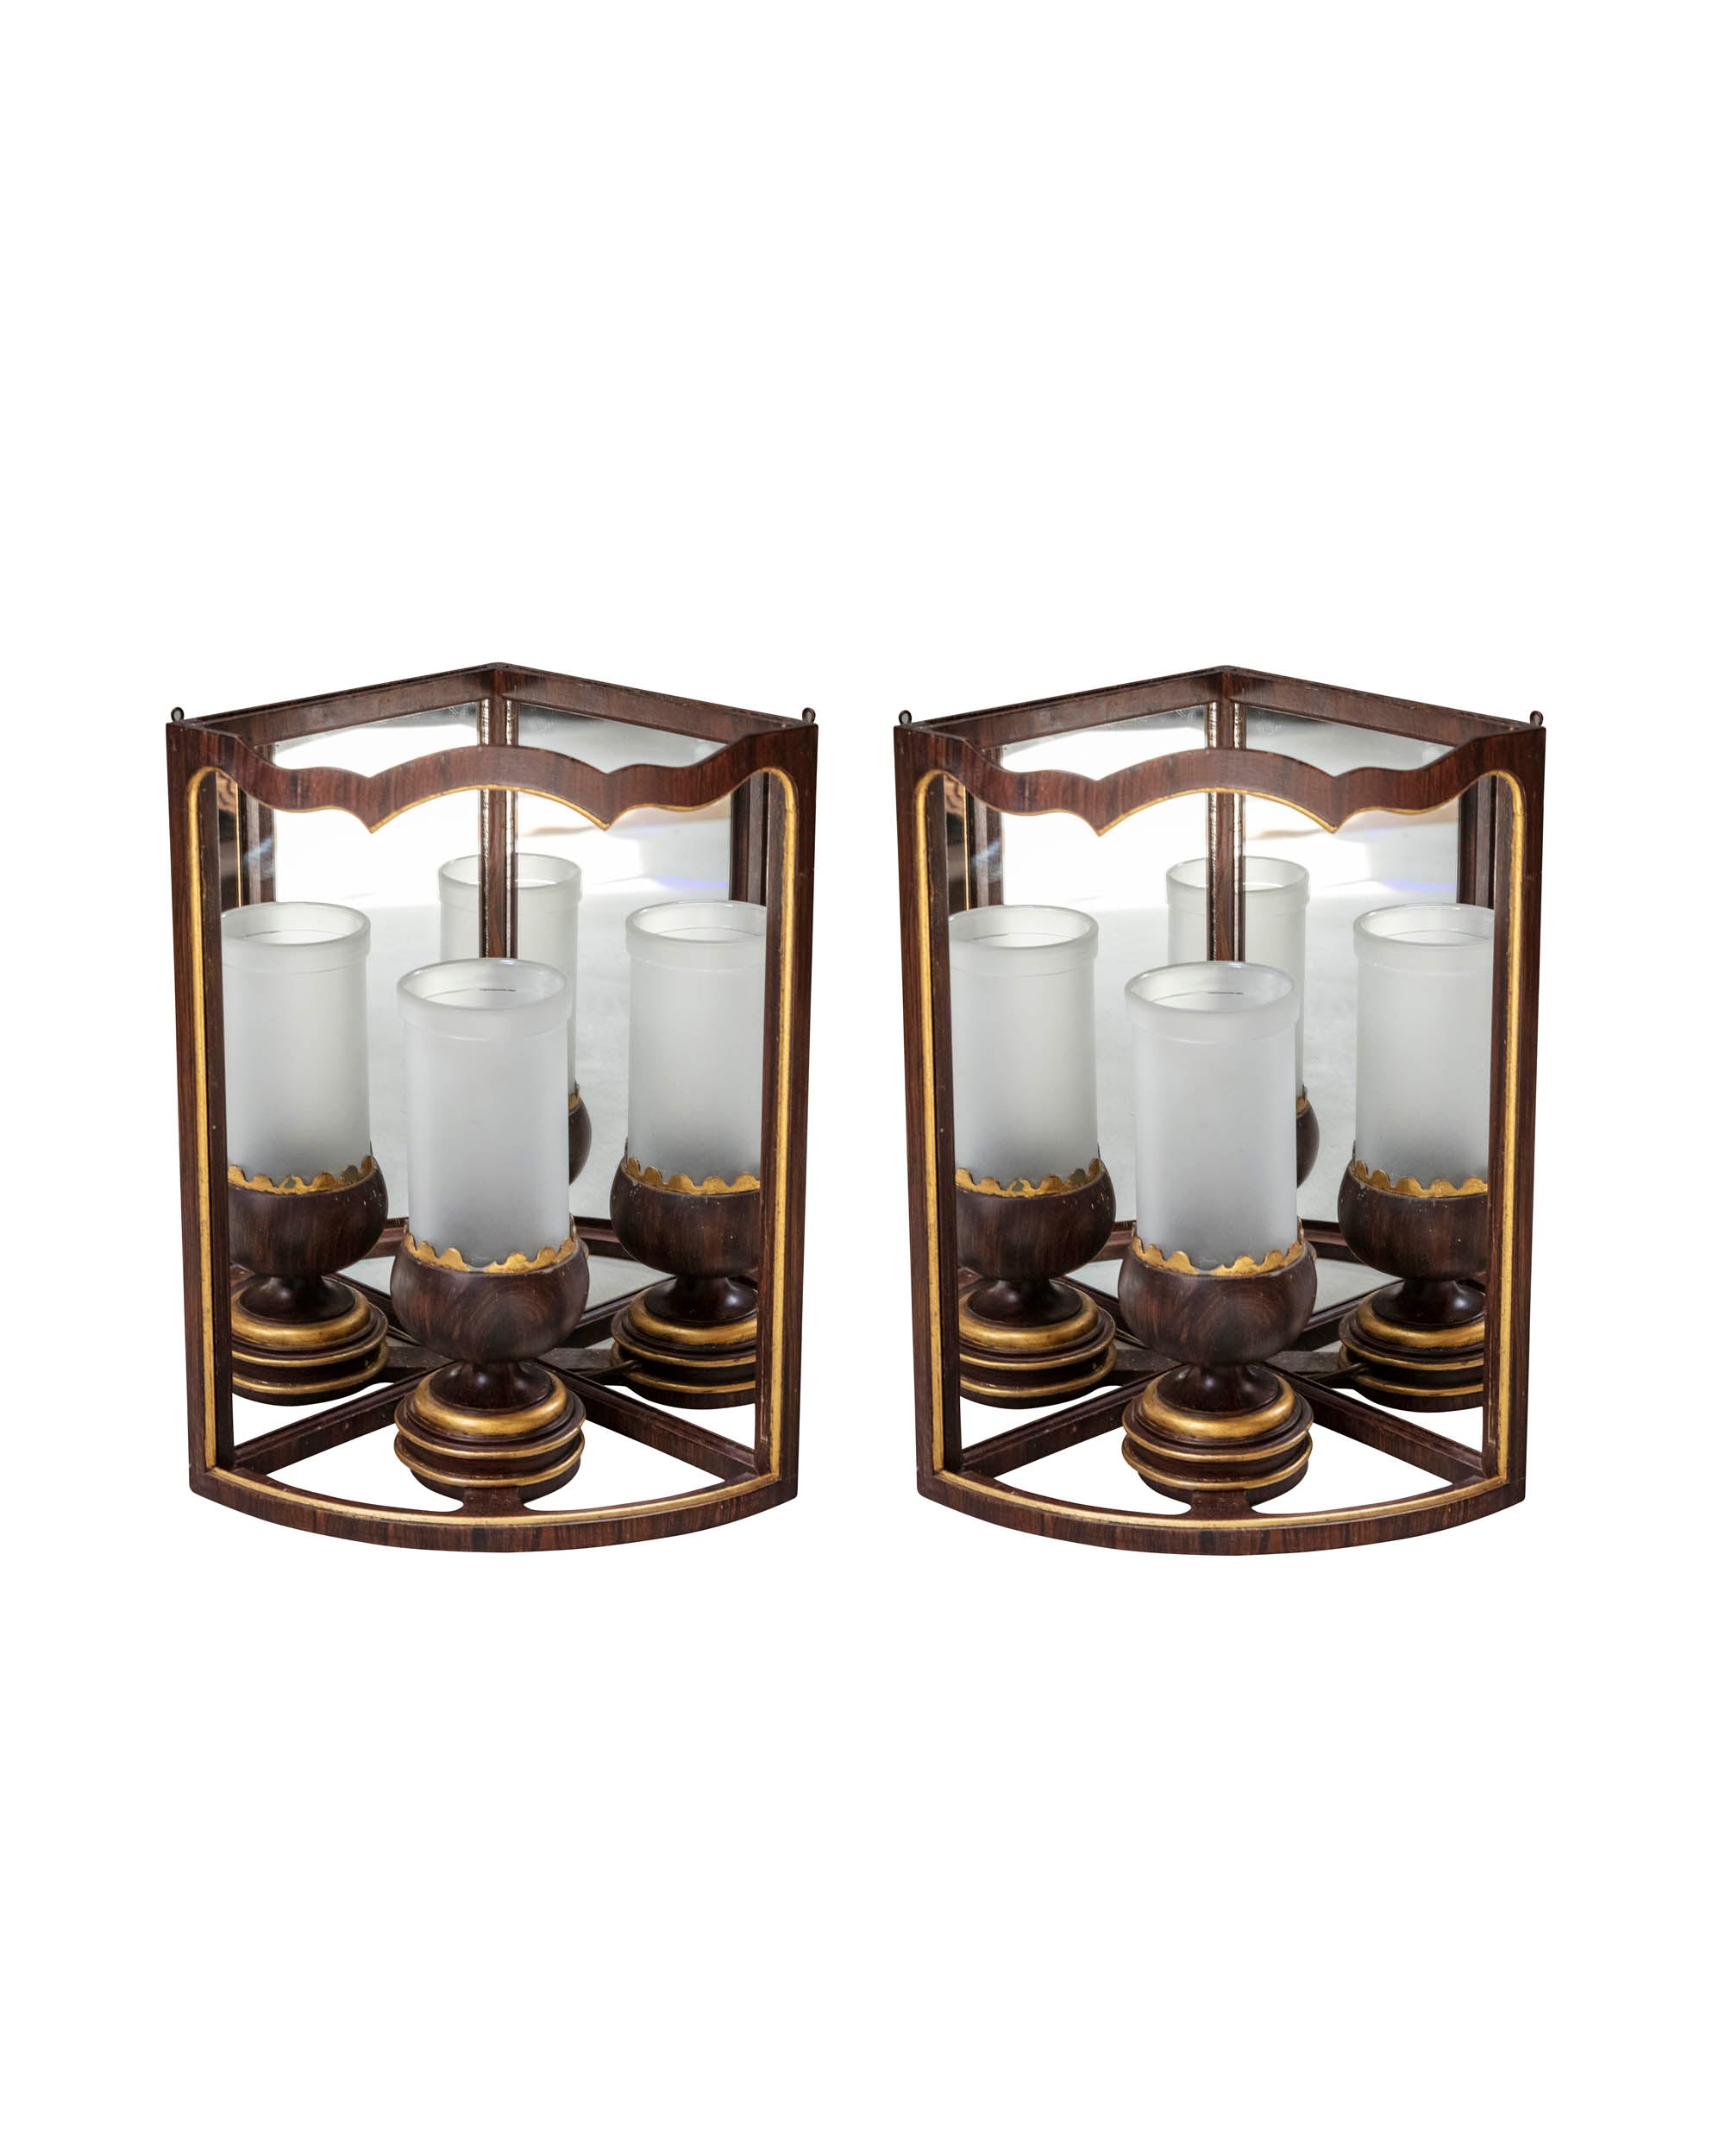 Pair of angular table lamps in polychrome wood, "Trompe l`oeil" effect with interior mirror. Early XXth century